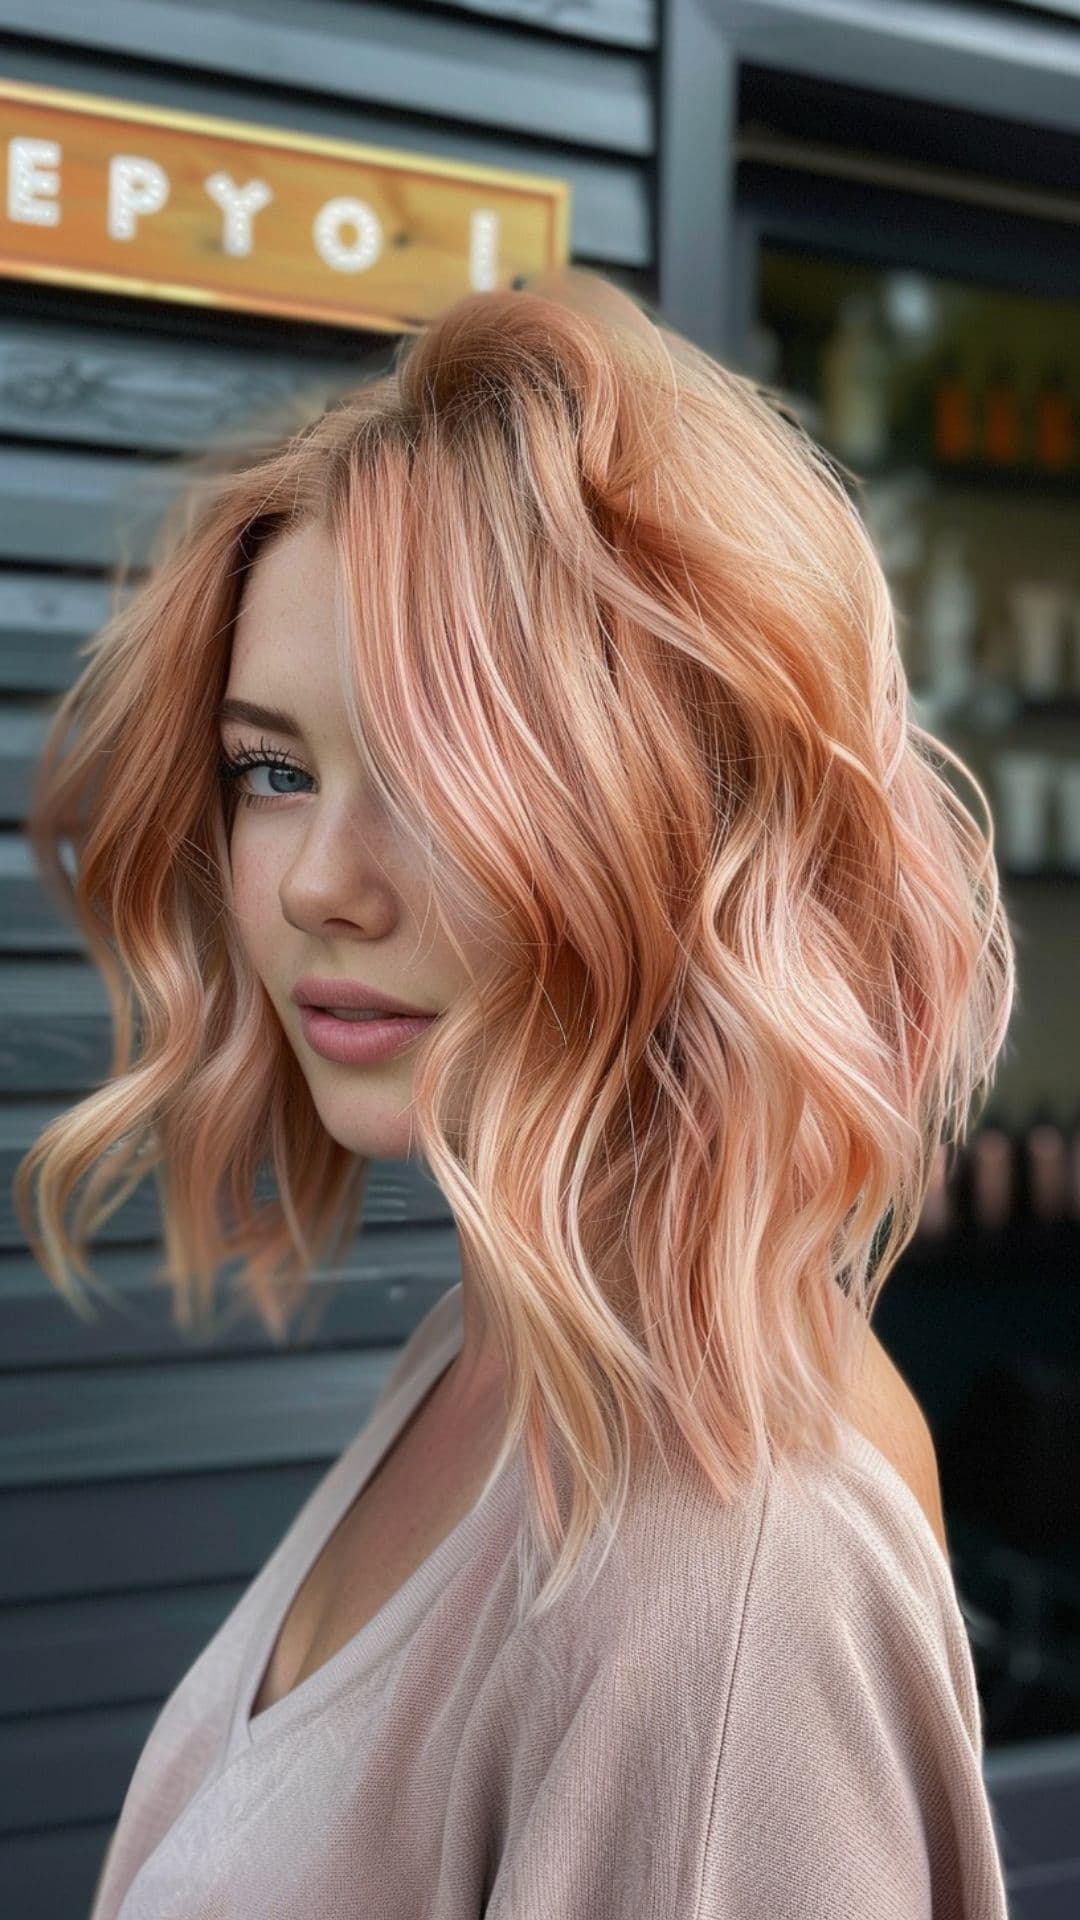 A woman modelling a pastel rose gold hair.